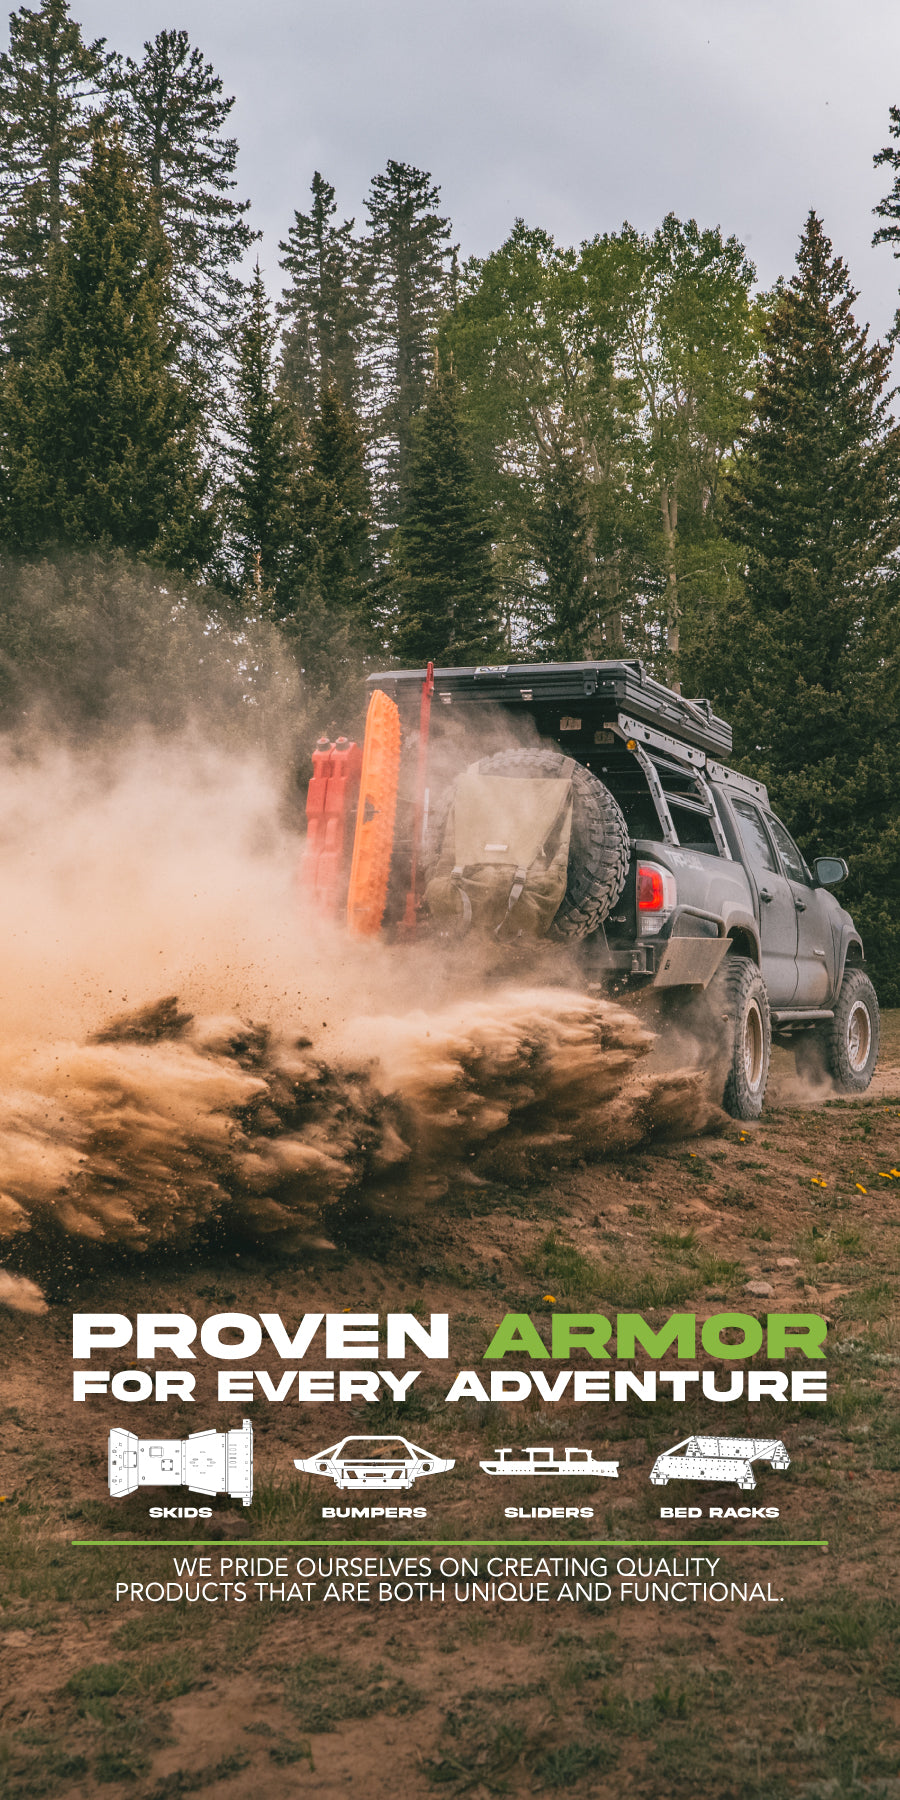 Proven armor for every adventure 3rd gen toyota tacoma from c4 fabrication we pride ourselves on creating quality products that are both unique and functional. skid plates, bumpers, rock sliders, and bed racks all manufactured in the usa steel off-road